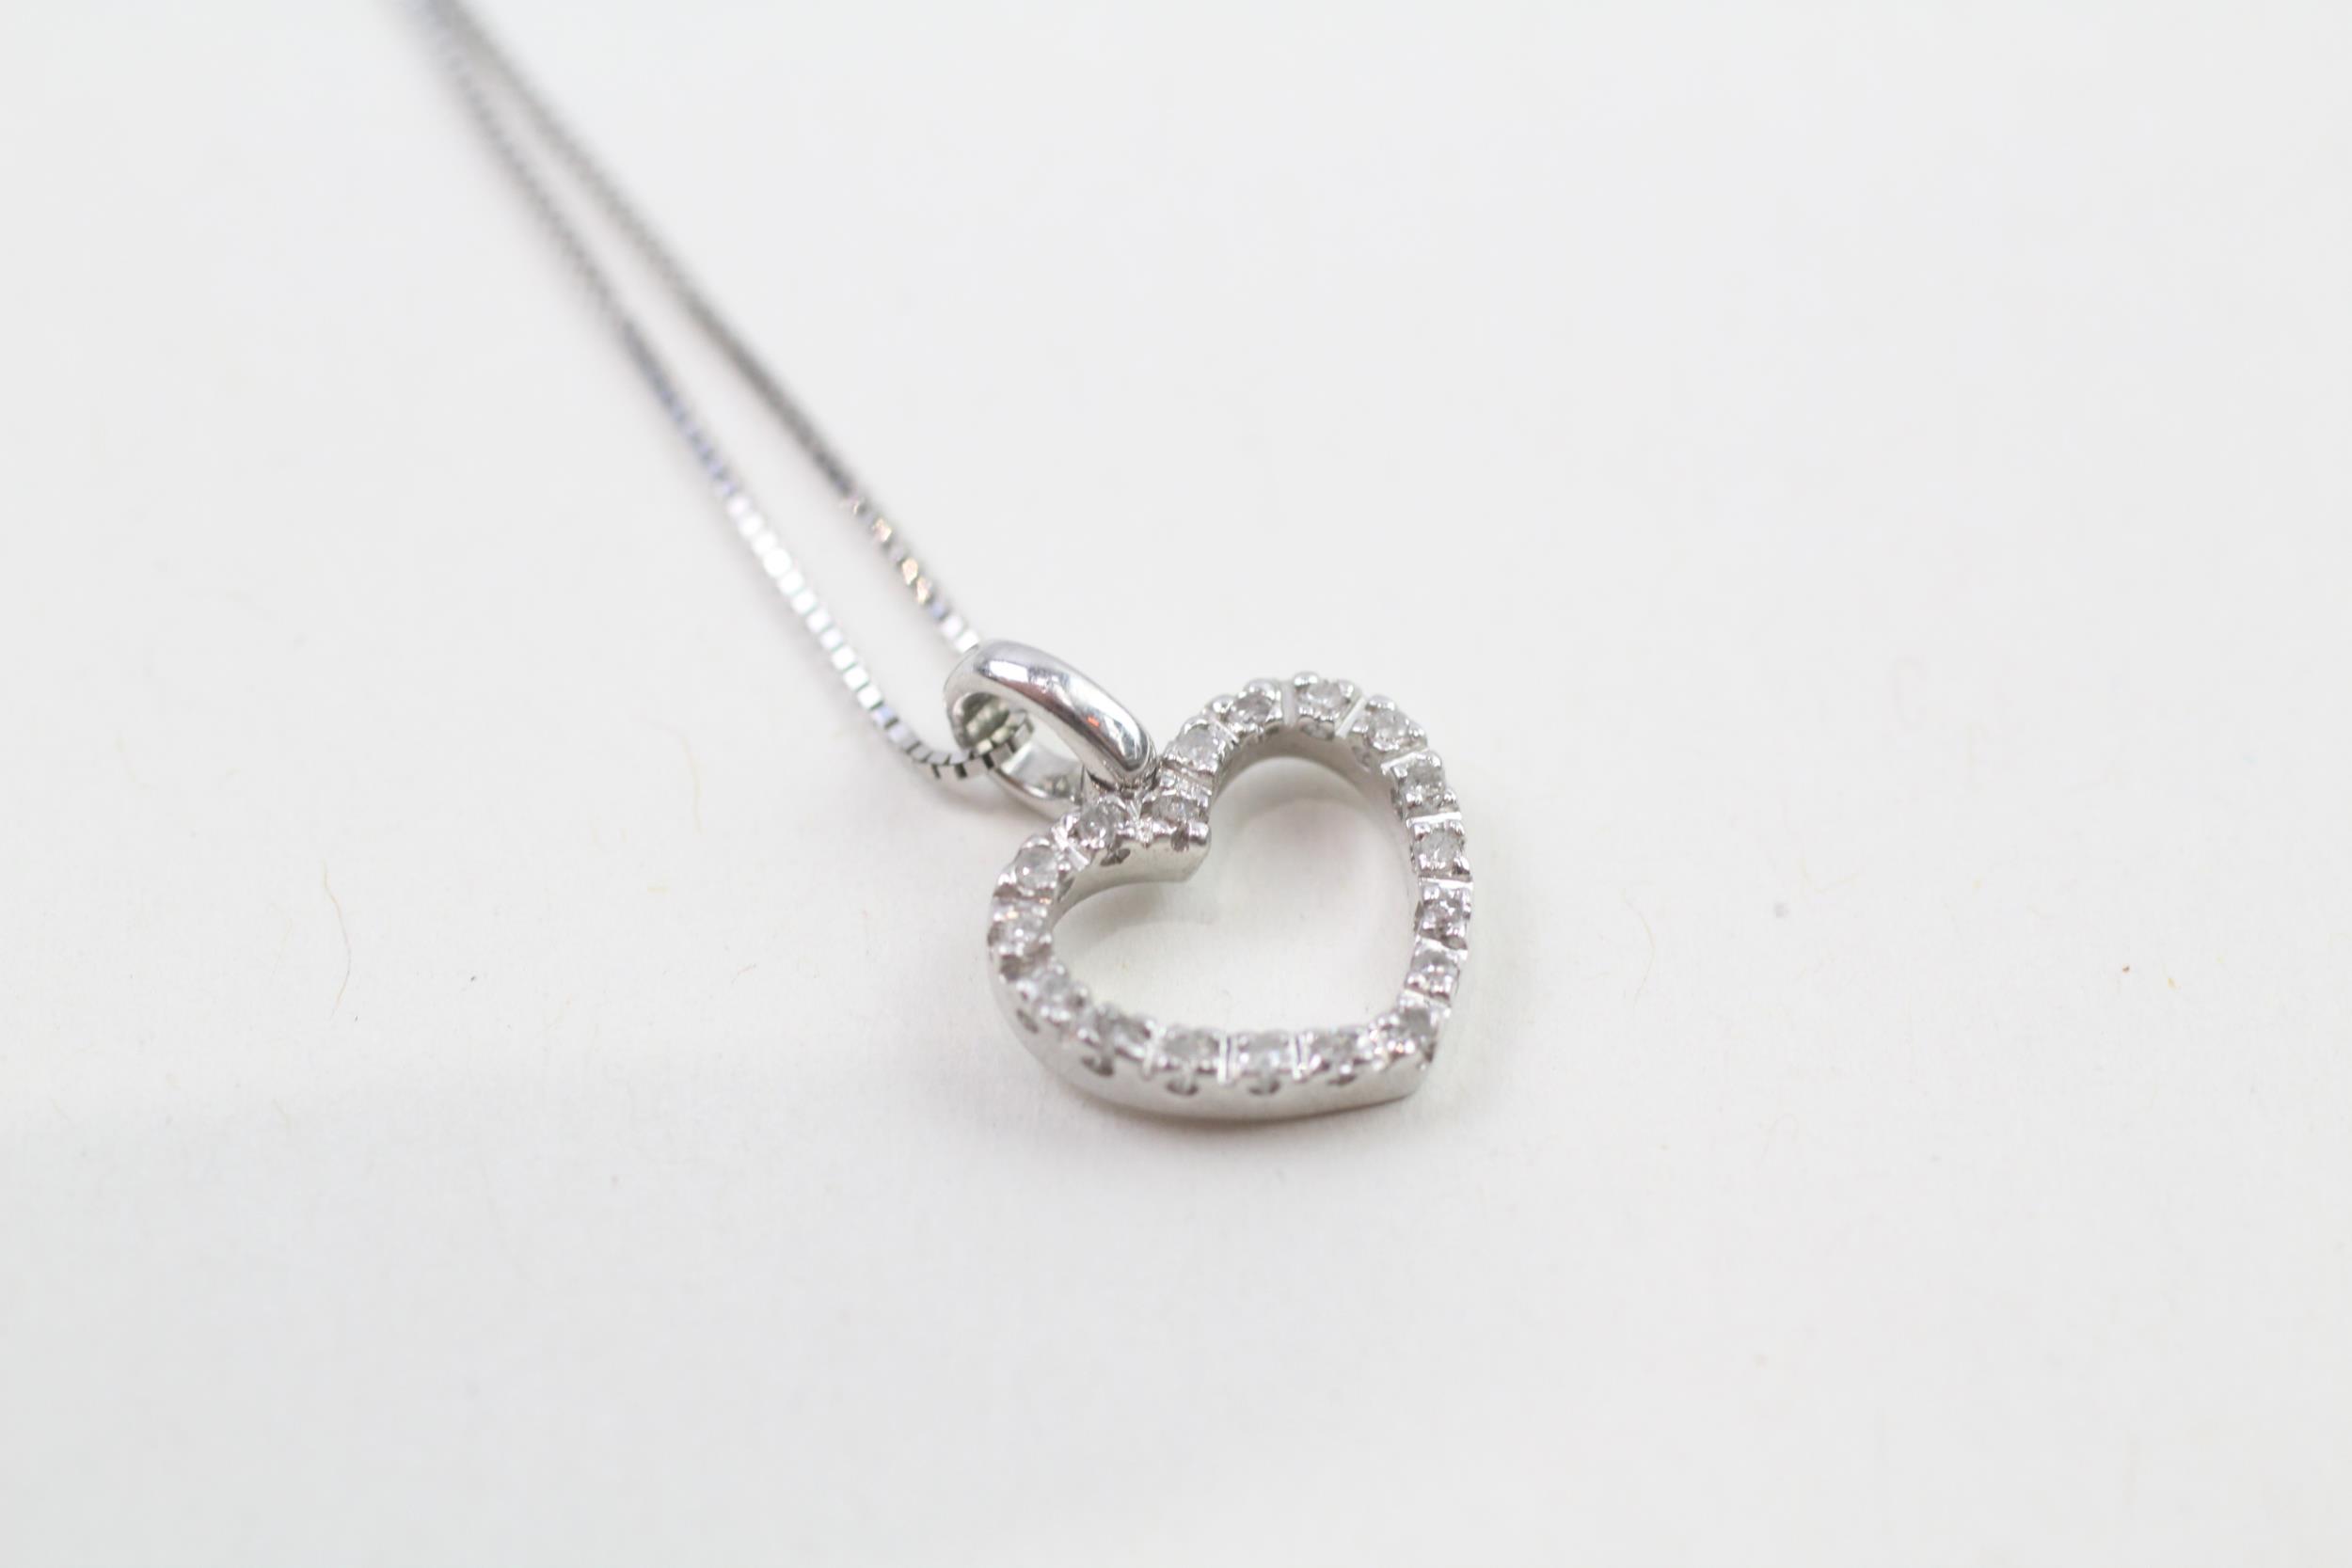 9ct white gold diamond heart pendant necklace (2.1g) - Image 2 of 4